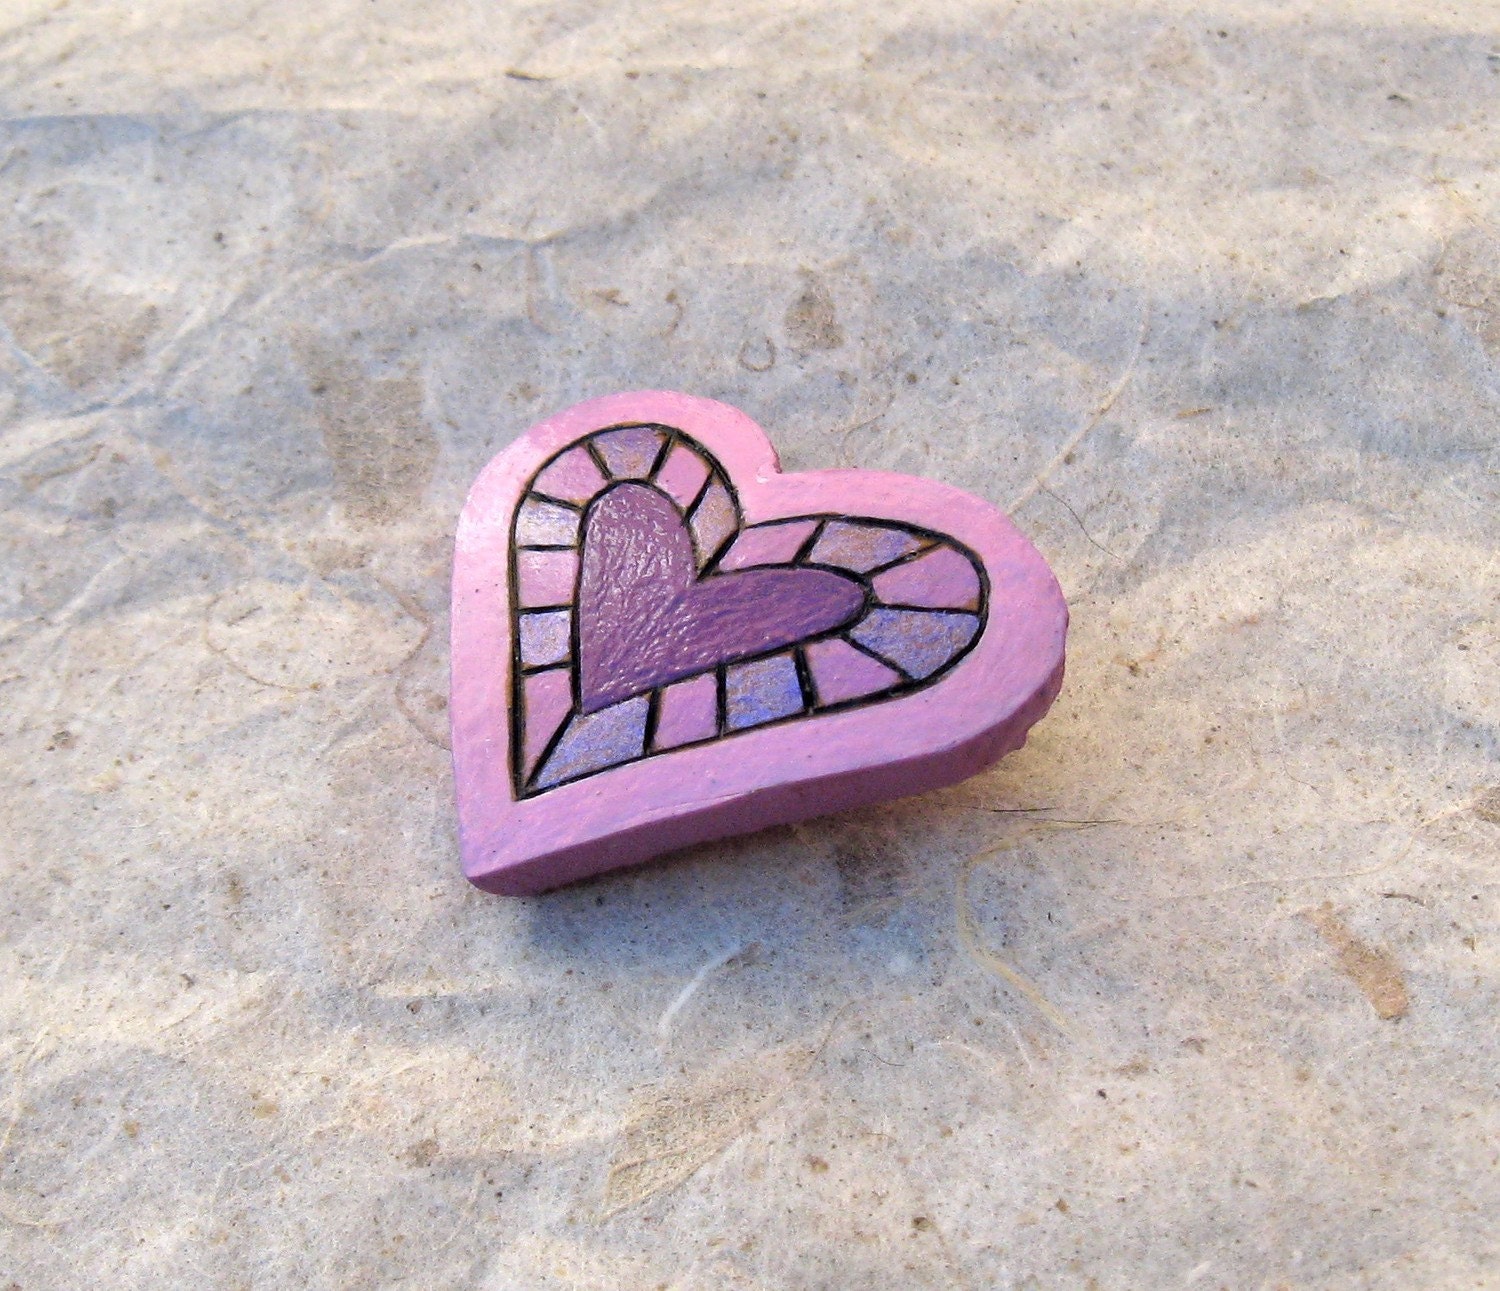 Gourd Heart Pin Brooch Pink Purple Bright Funky Whimsical Fun Woodburned & Painted